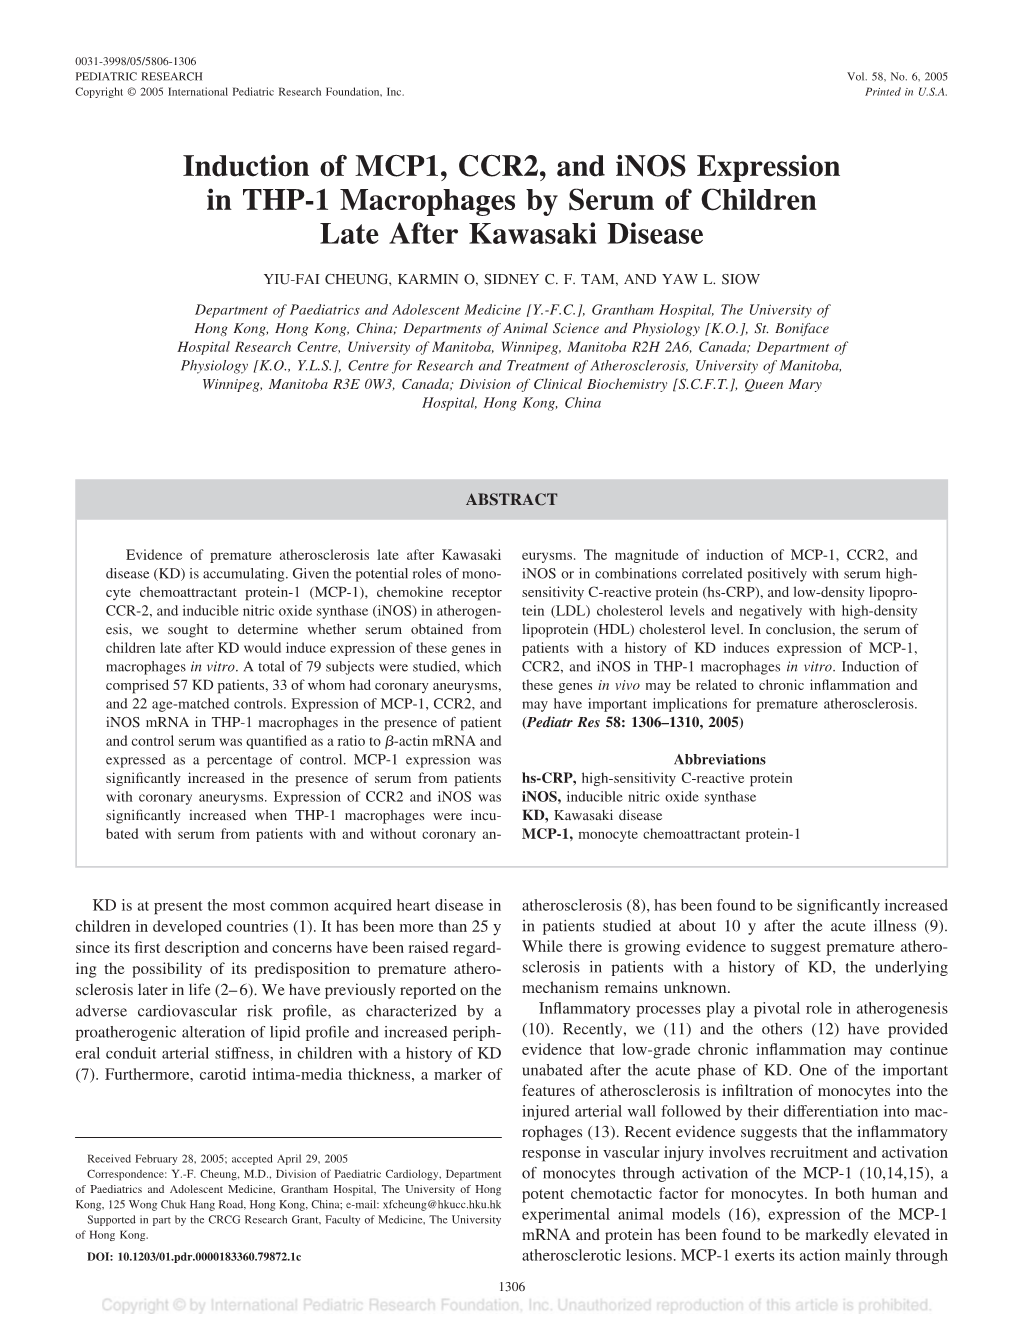 Induction of MCP1, CCR2, and Inos Expression in THP-1 Macrophages by Serum of Children Late After Kawasaki Disease